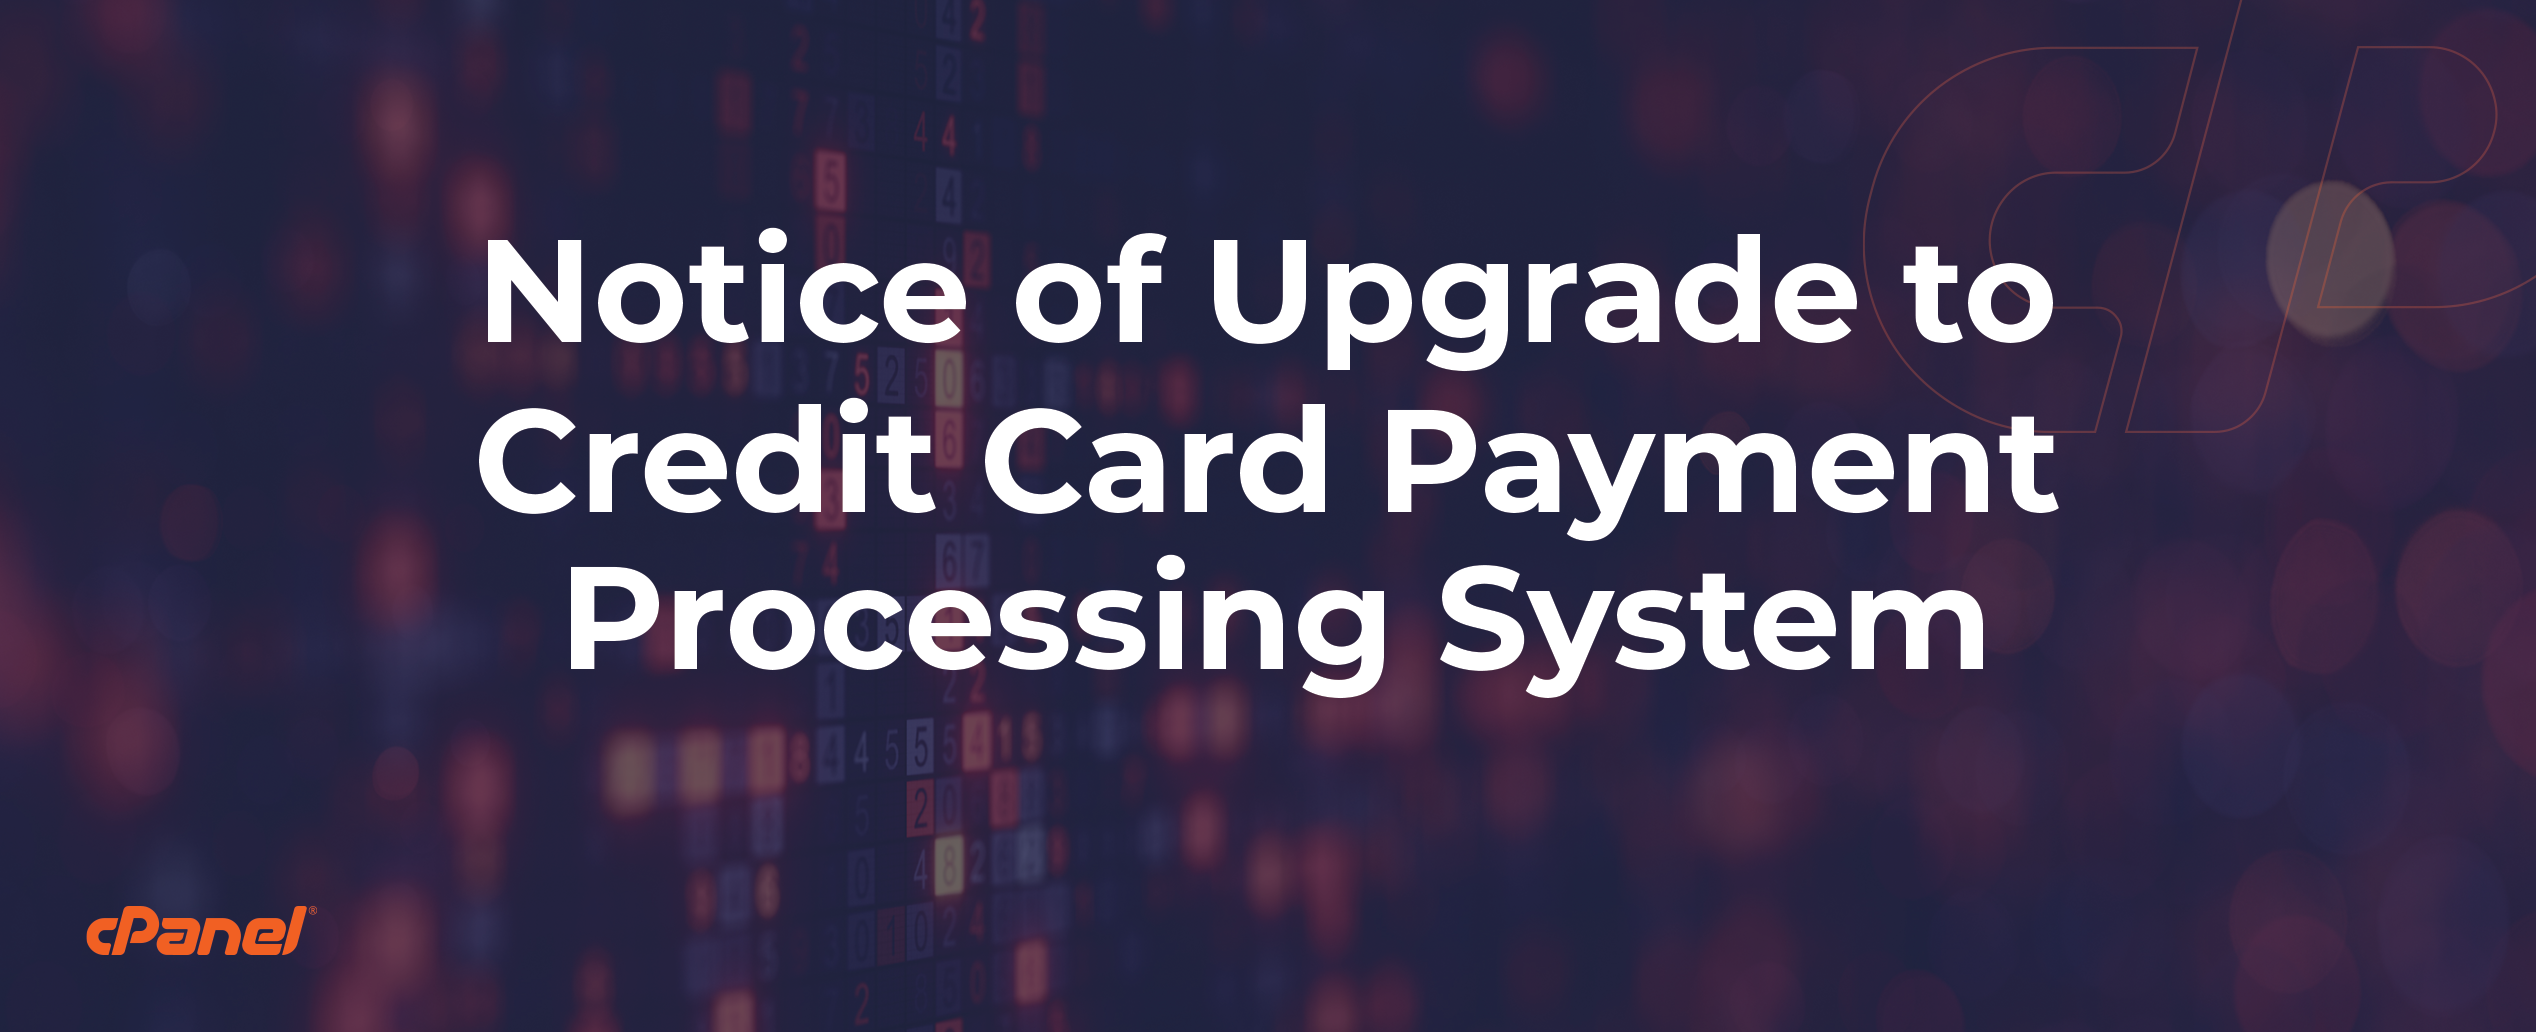 Notice of Upgrade to Credit Card Processing System